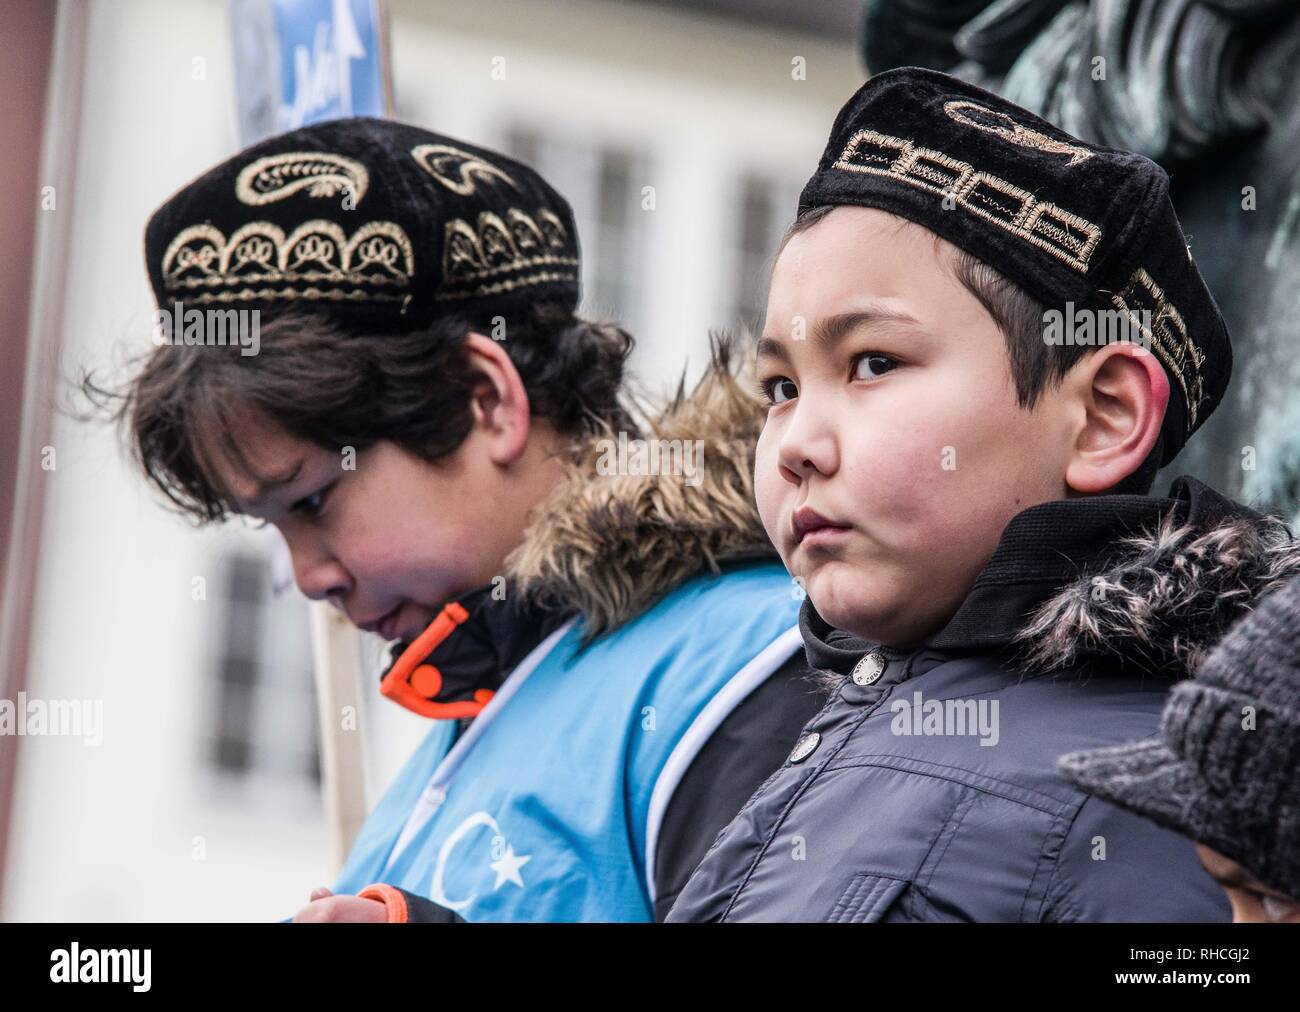 Munich, Bavaria, Germany. 2nd Feb, 2019. Uyghur children in Germany protesting with the flag of East Turkestan, which is also known as the Xinjiang Autonomous Province. to protest against the so-called 'Muslim Crackdown'' by the Chinese Communist Party in the Xinjiang Autonomous Region of China. The region is contains roughly 26 million people, 11 million of whom are the ethnically Turkic Uyghurs who still call the region East Turkistan . The CCP has placed upwards of 1 million Uyghurs in reeducation ca Credit: ZU Credit: ZUMA Press, Inc./Alamy Live News Stock Photo